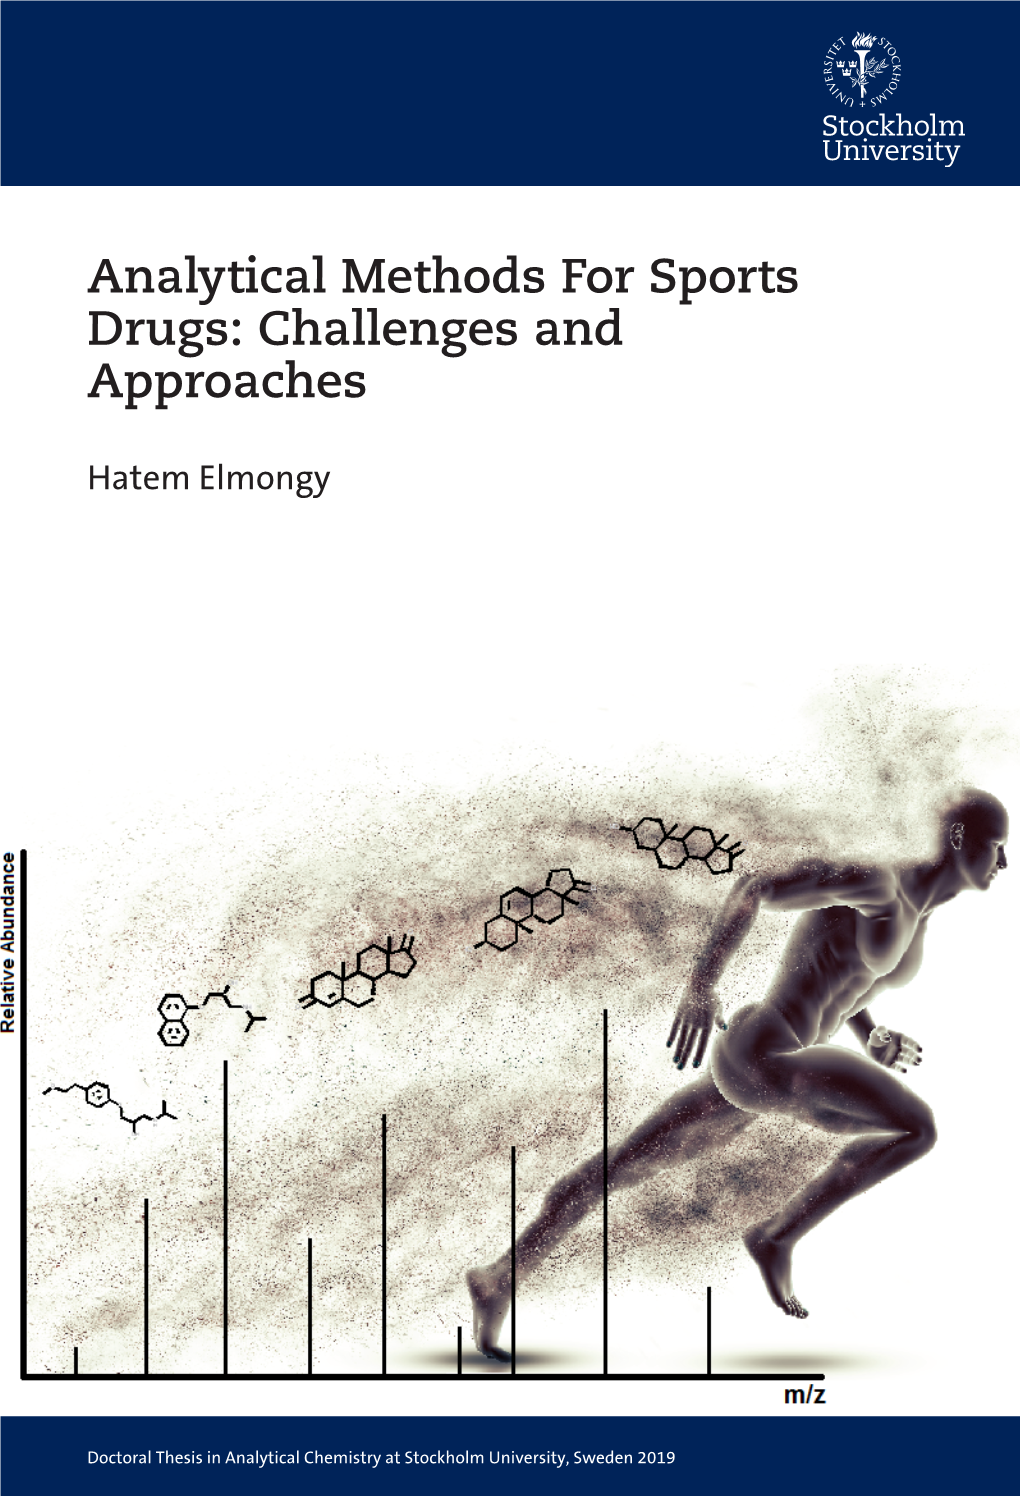 Analytical Methods for Sports Drugs: Challenges and Approaches Analytical for Methods and Sports Drugs: Challenges Approaches Hatem Elmongy